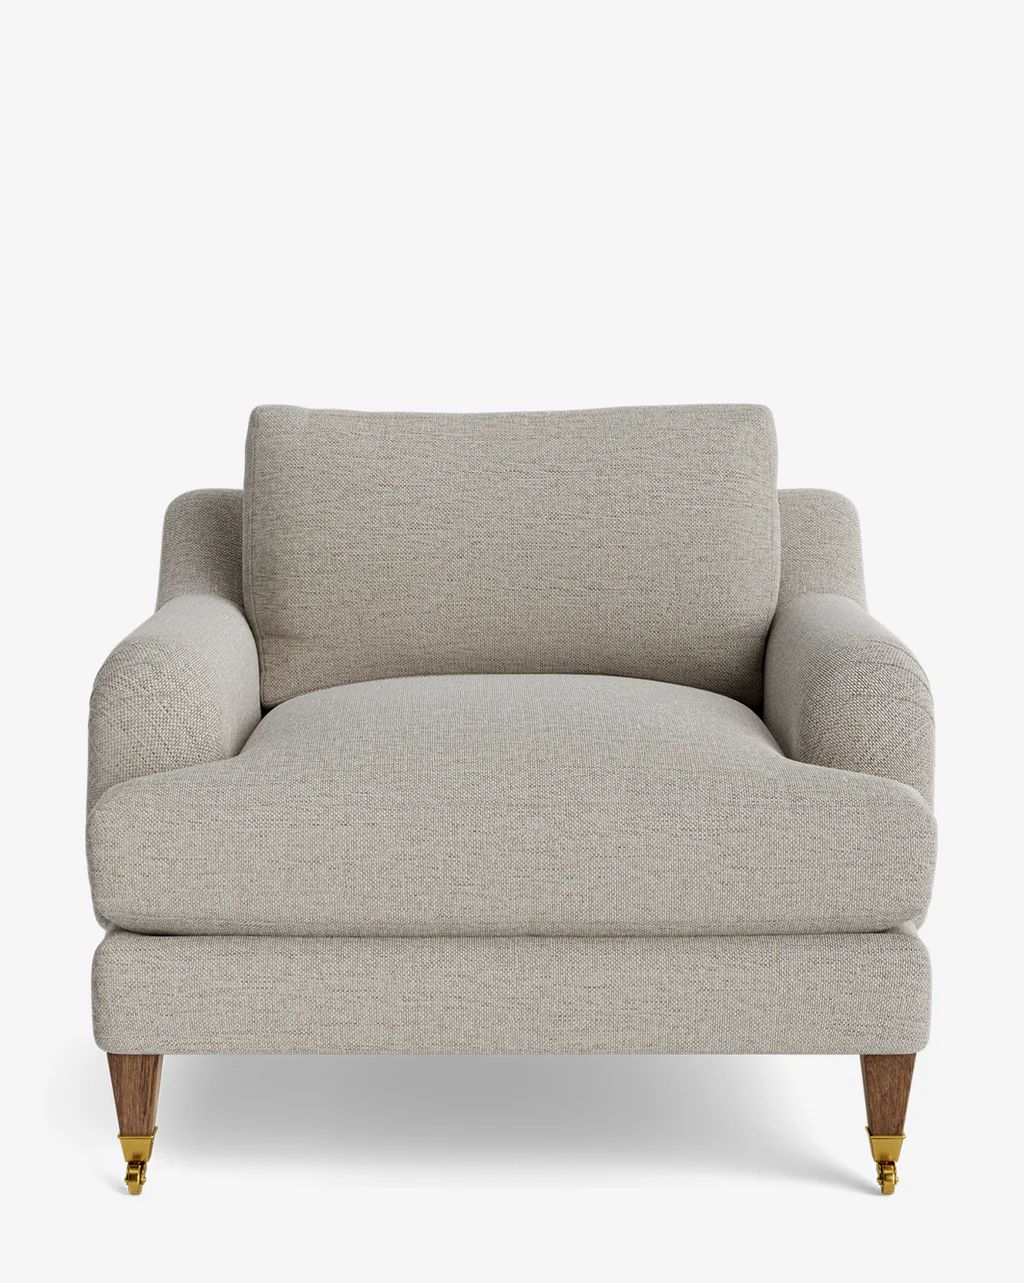 Lucille English Roll Arm Chair | McGee & Co.